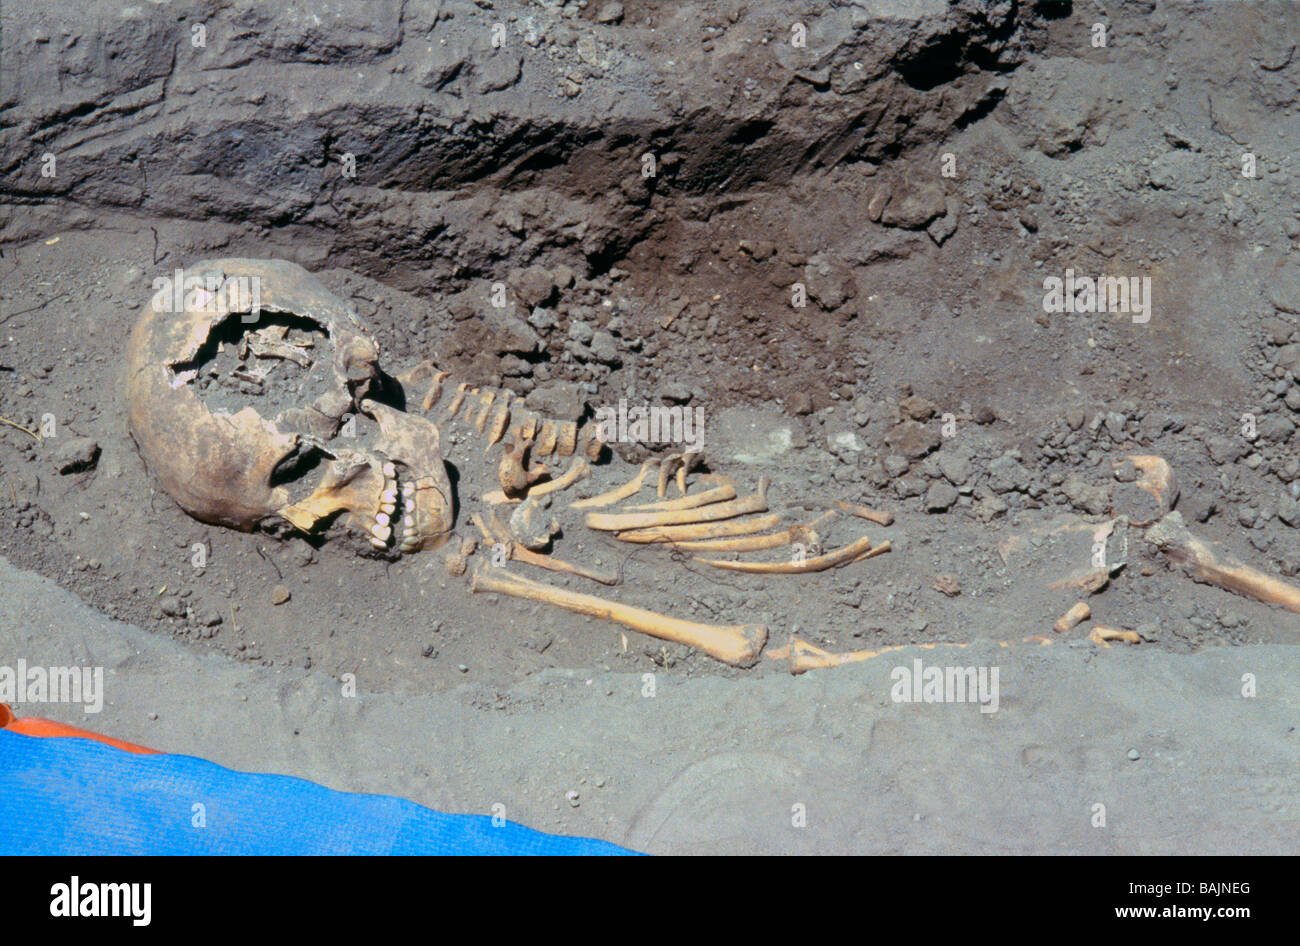 Skeletal remains in situ at the archaeological site of Catalhoyuk, an early Neolithic settlement, central Anatolia Turkey Stock Photo